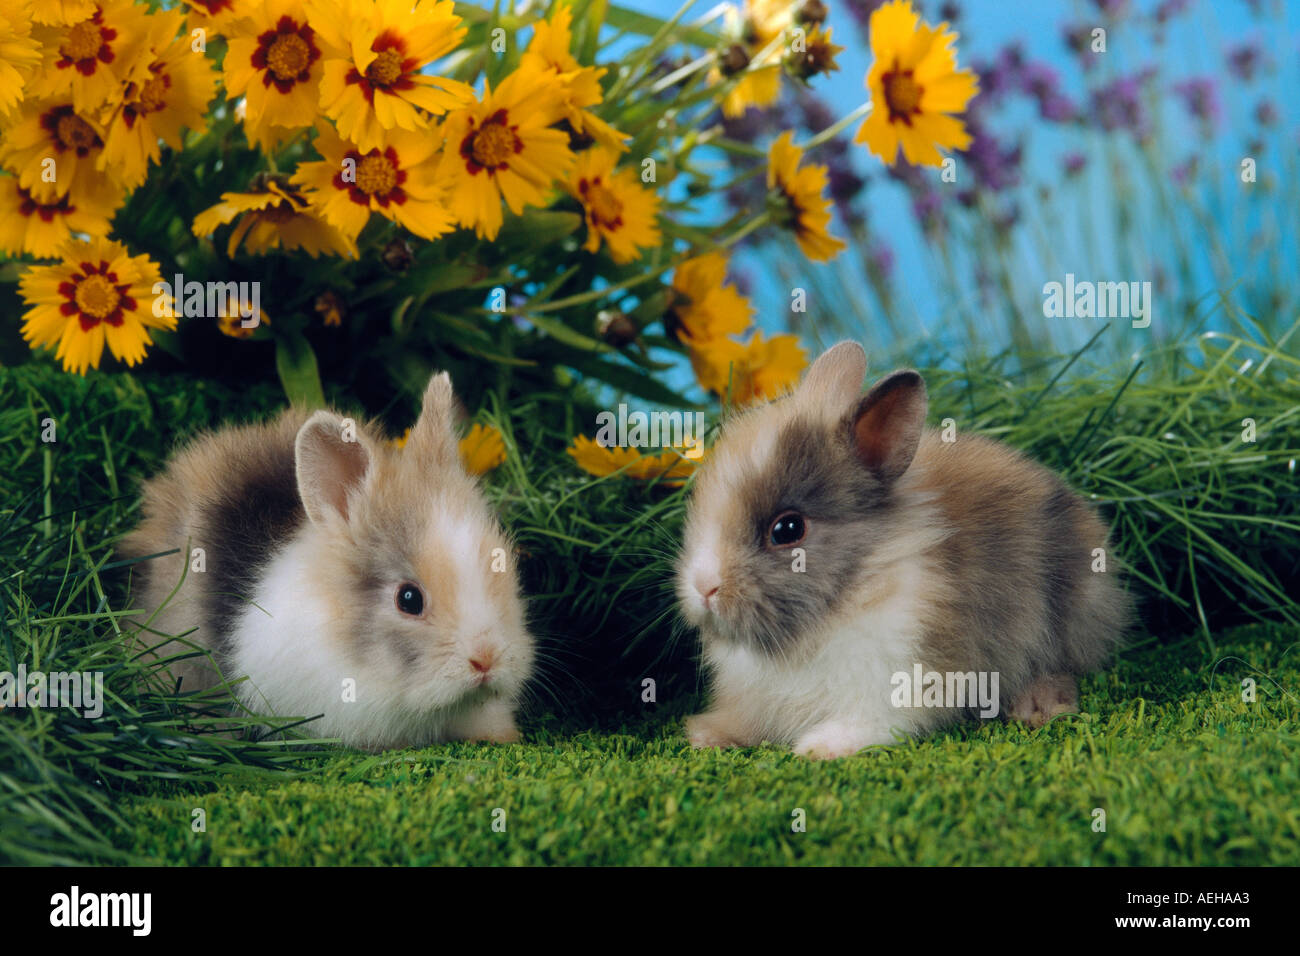 two young pygmy rabbits in front of flowers / Sylilagus idahoensis / Brachylagus idahoensis Stock Photo